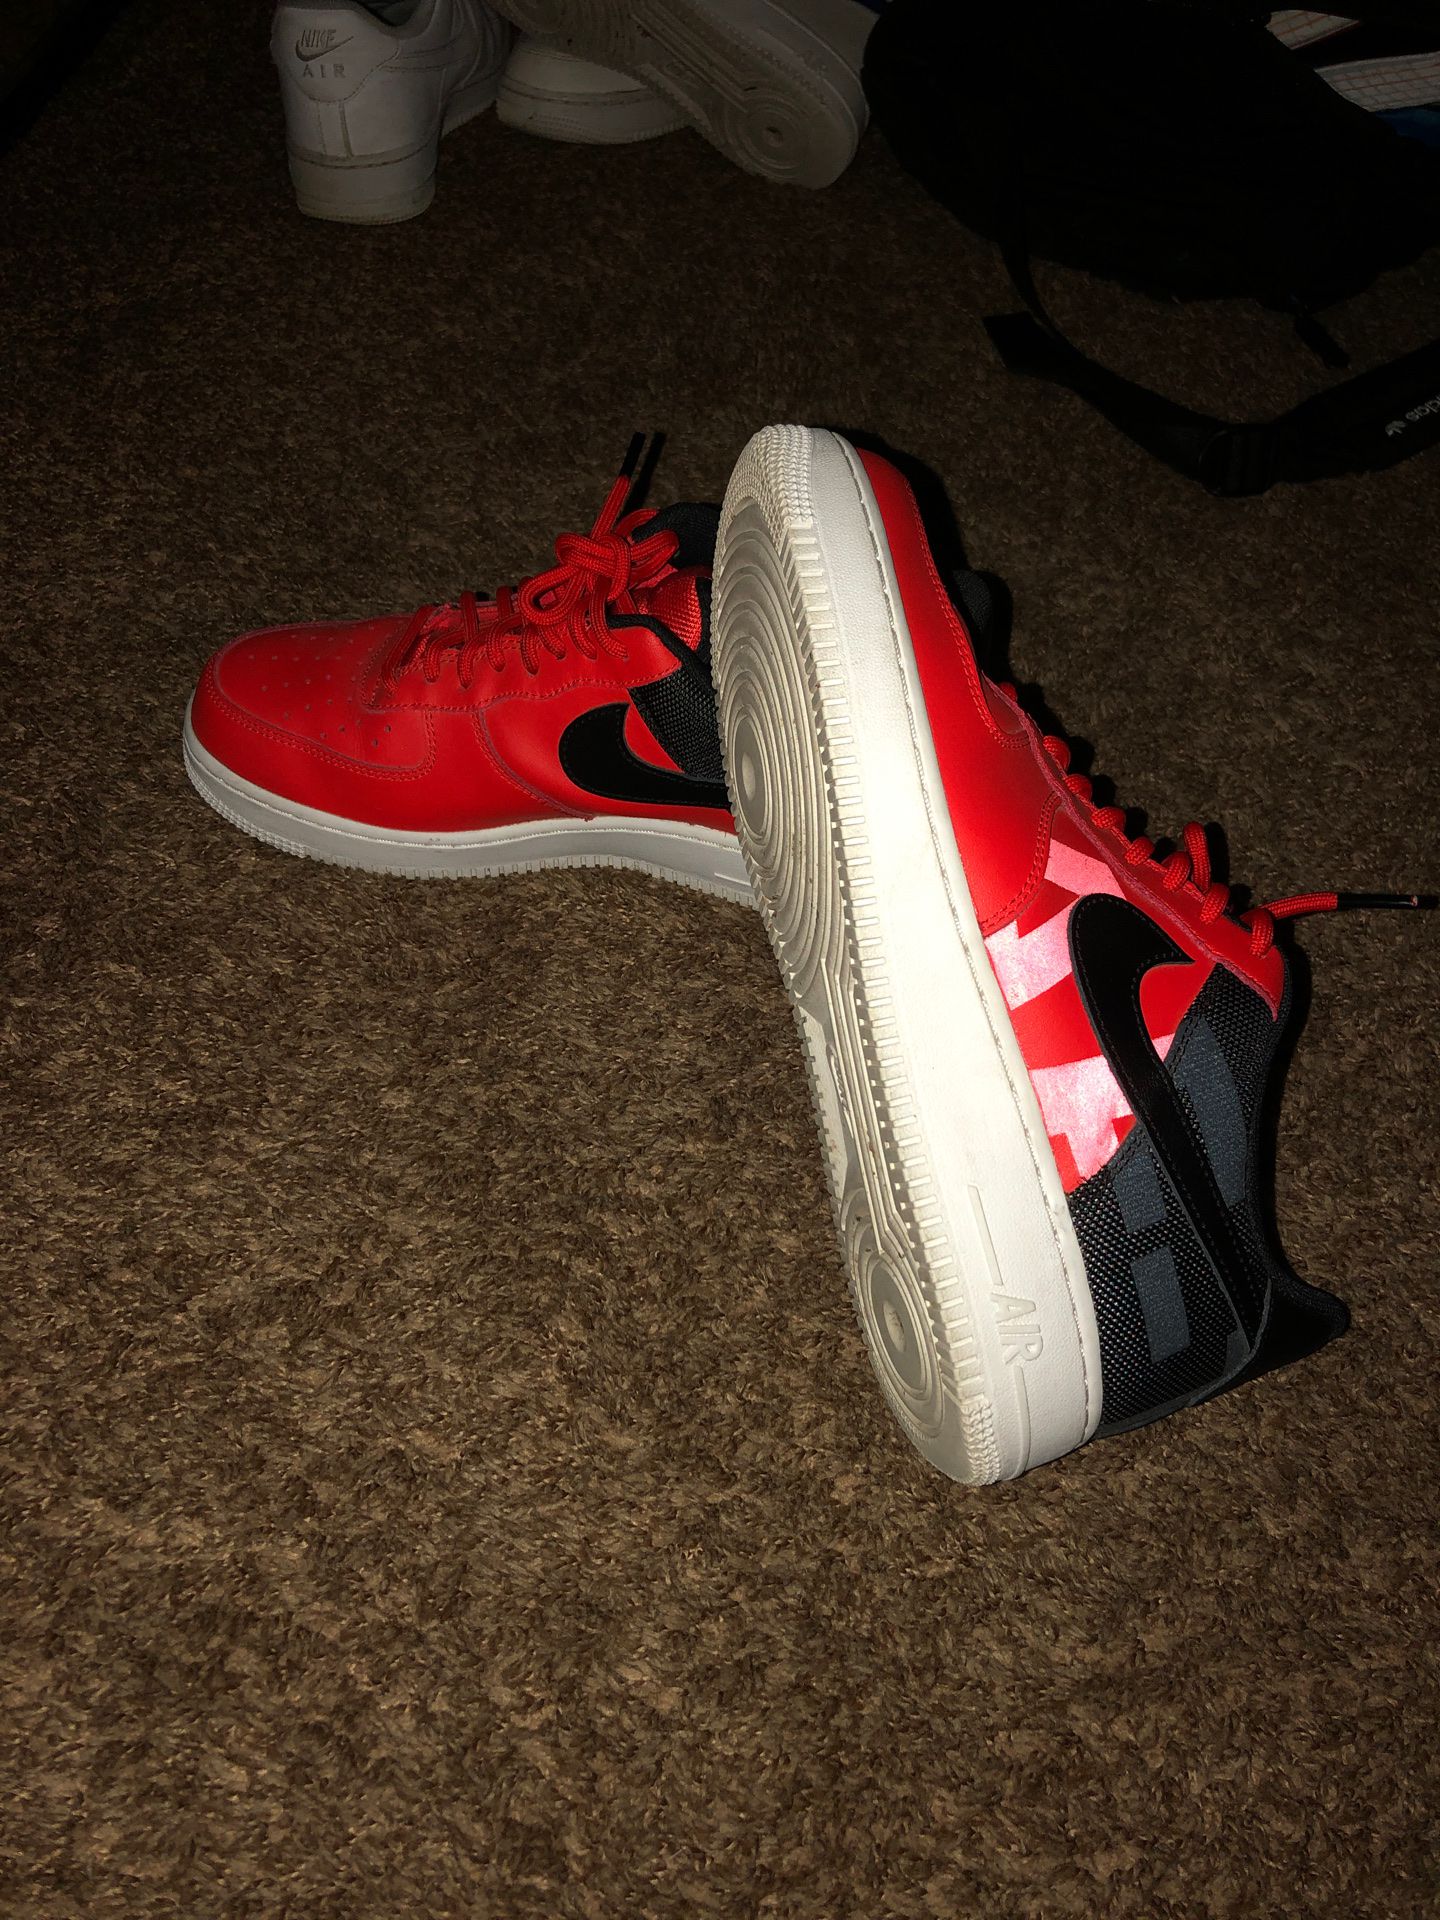 Red/white /black Air Force 1’s (pick up only) SIZE 8.5